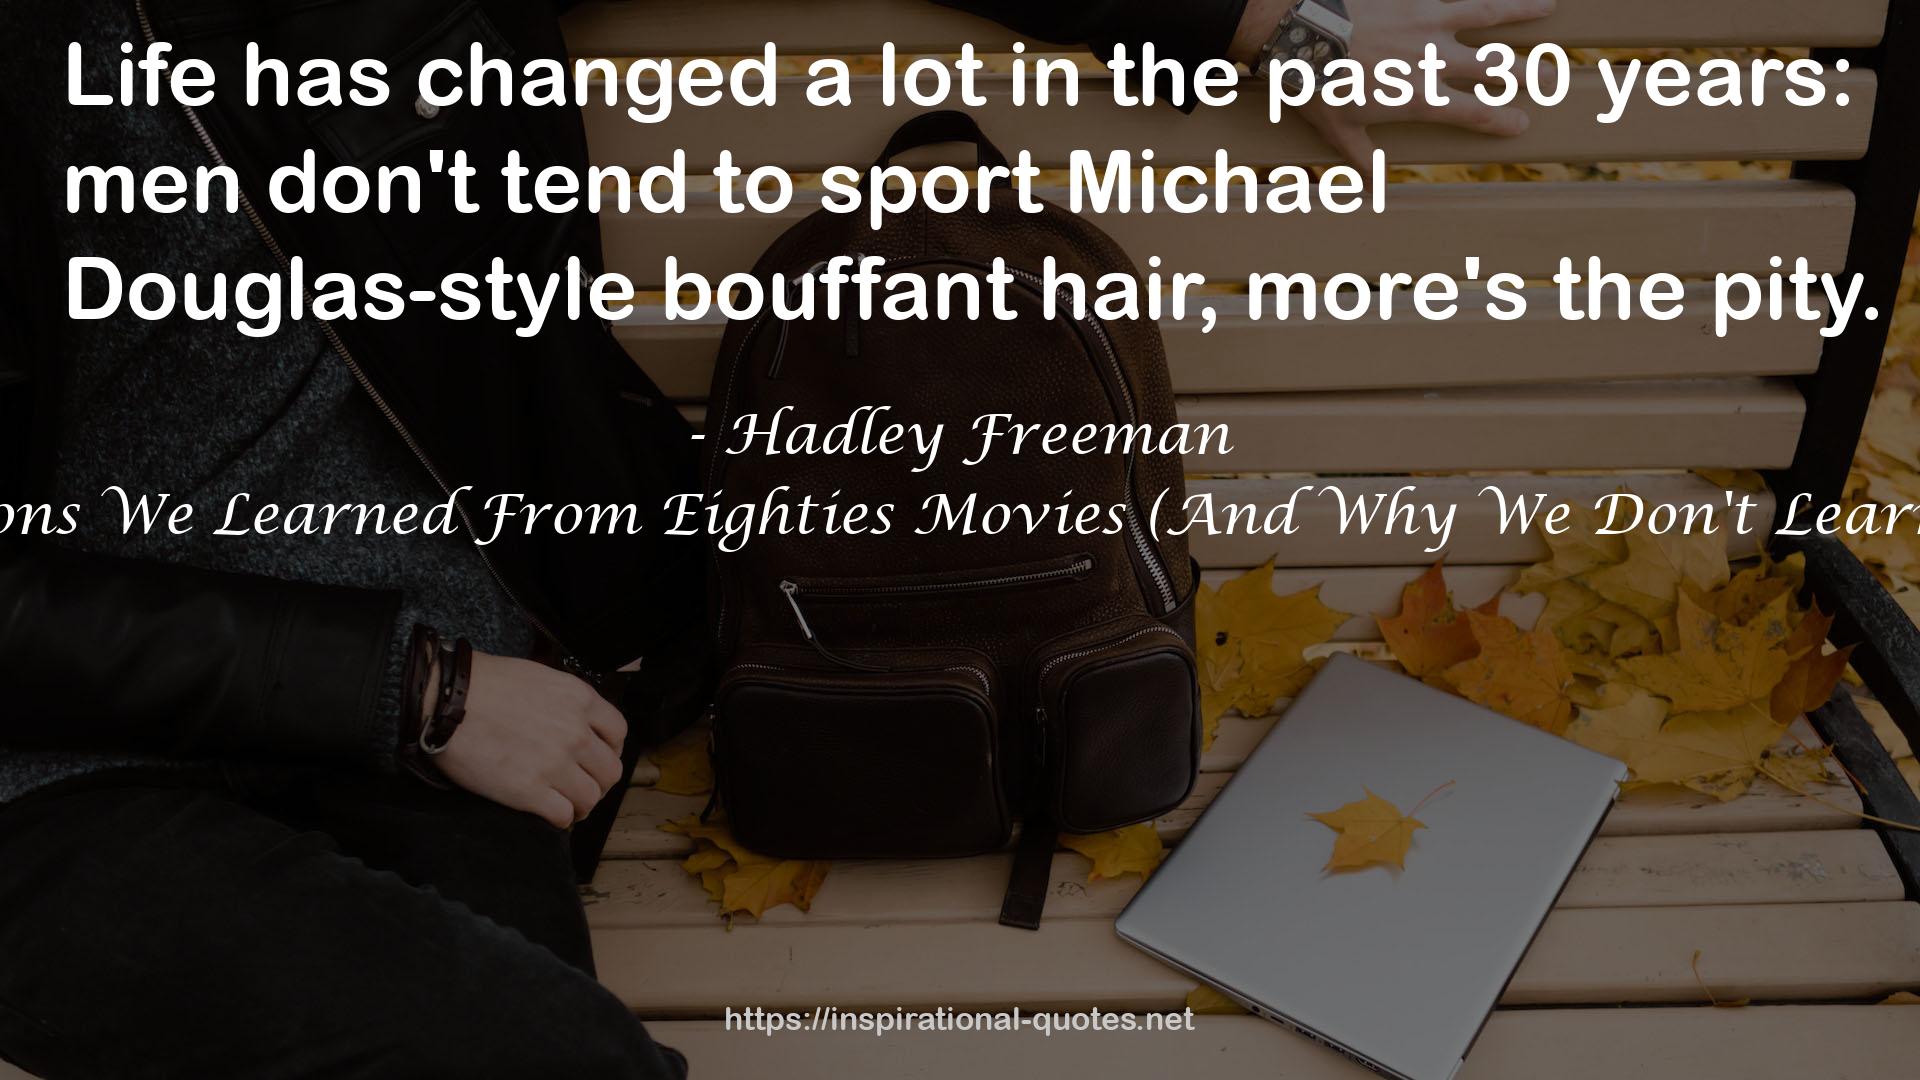 Life Moves Pretty Fast: The Lessons We Learned From Eighties Movies (And Why We Don't Learn Them From Movies Any More) QUOTES